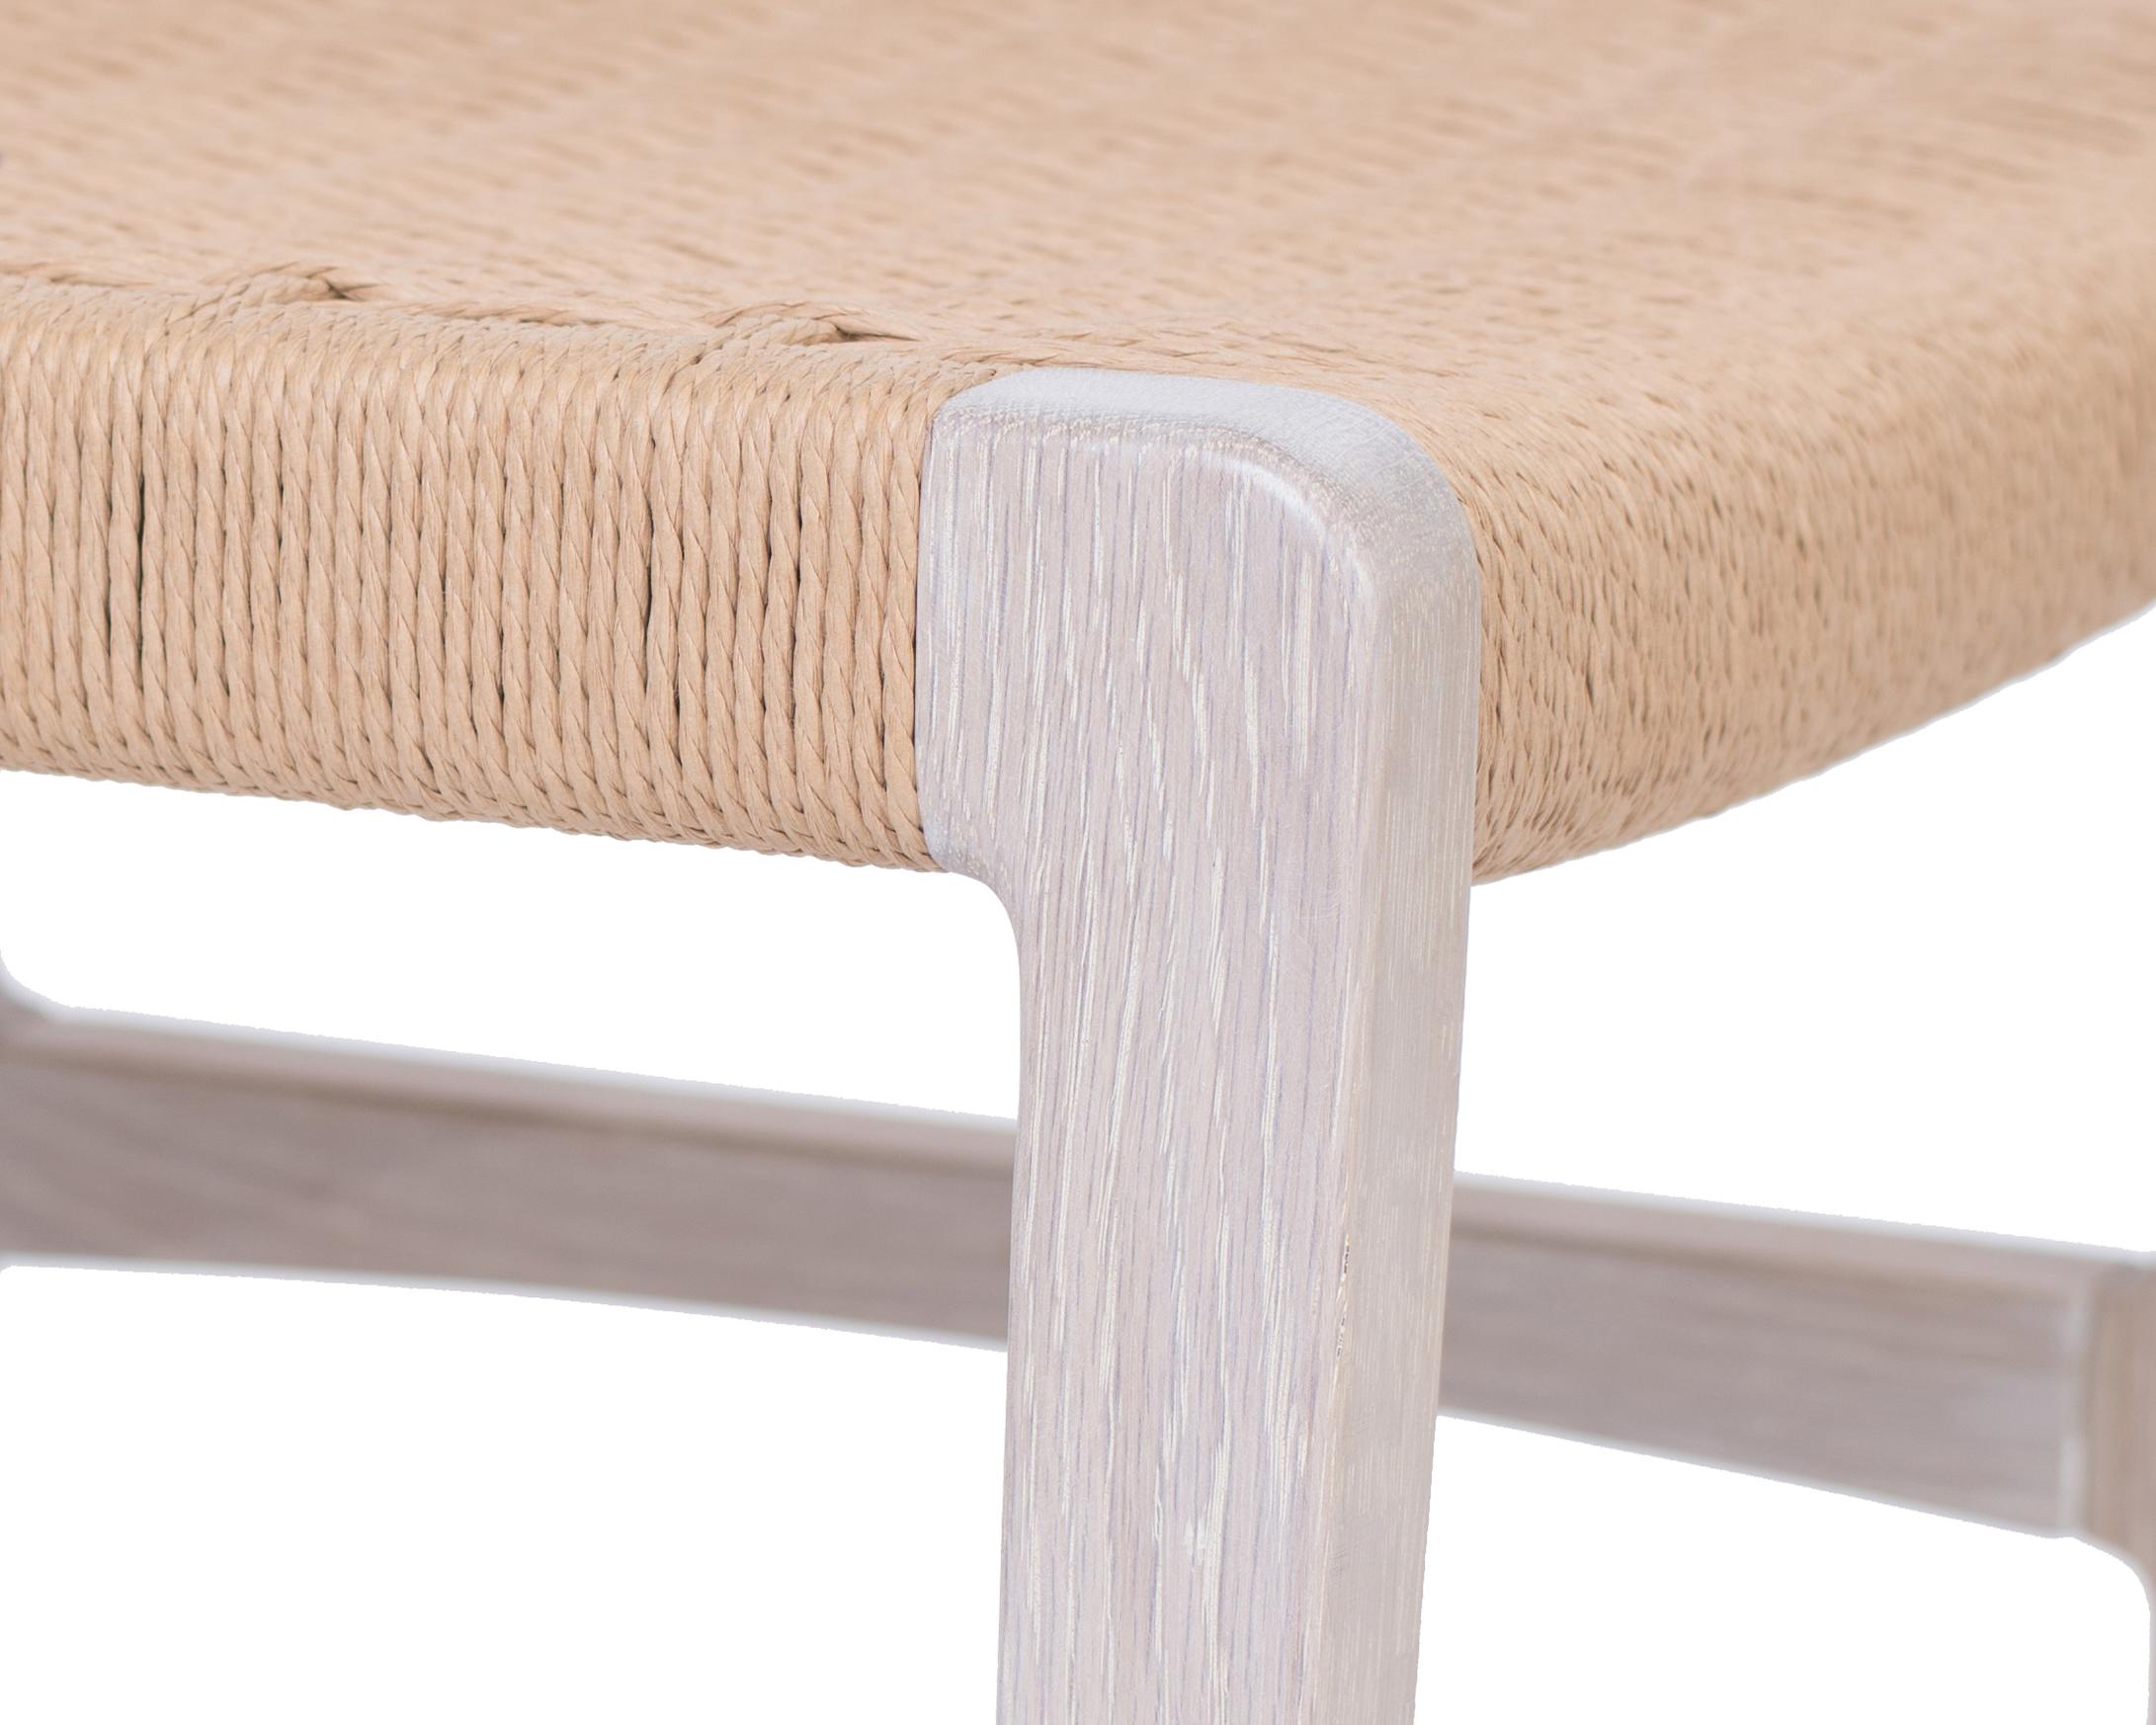 Stained Giacomo Stool / Ottoman in Whitewashed Oak with Danish Cord